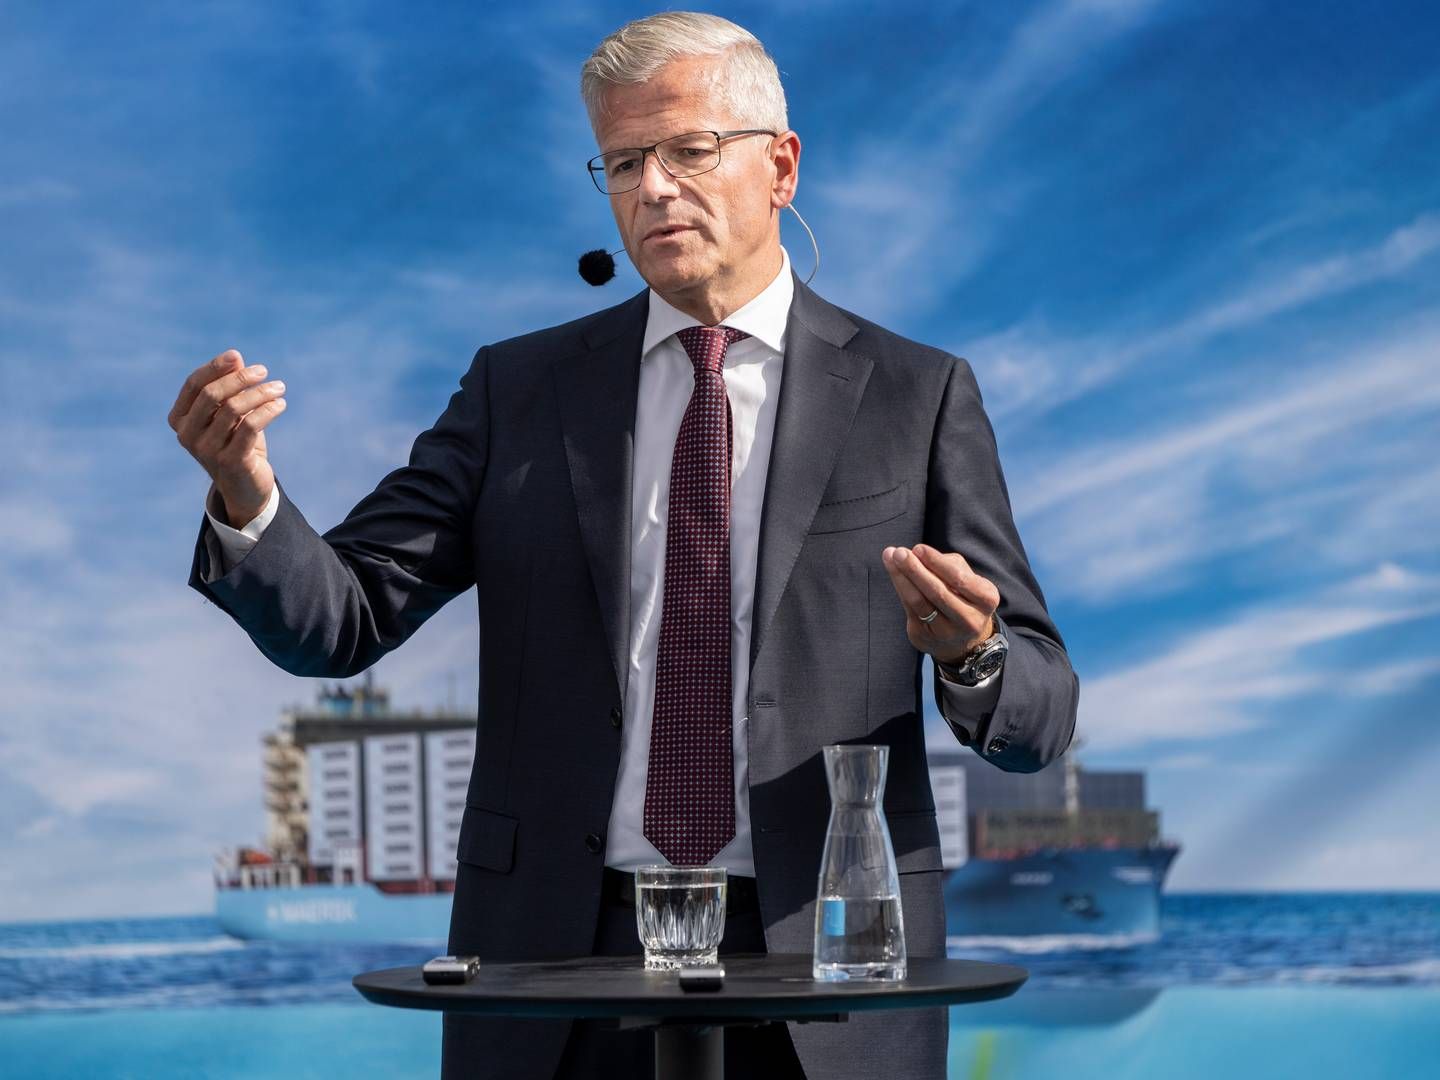 "It may be that in a few years we will order ammonia-powered ships when the technology is more mature," Vincent Clerc, CEO of Maersk, said at a press conference. | Foto: Mads Claus Rasmussen